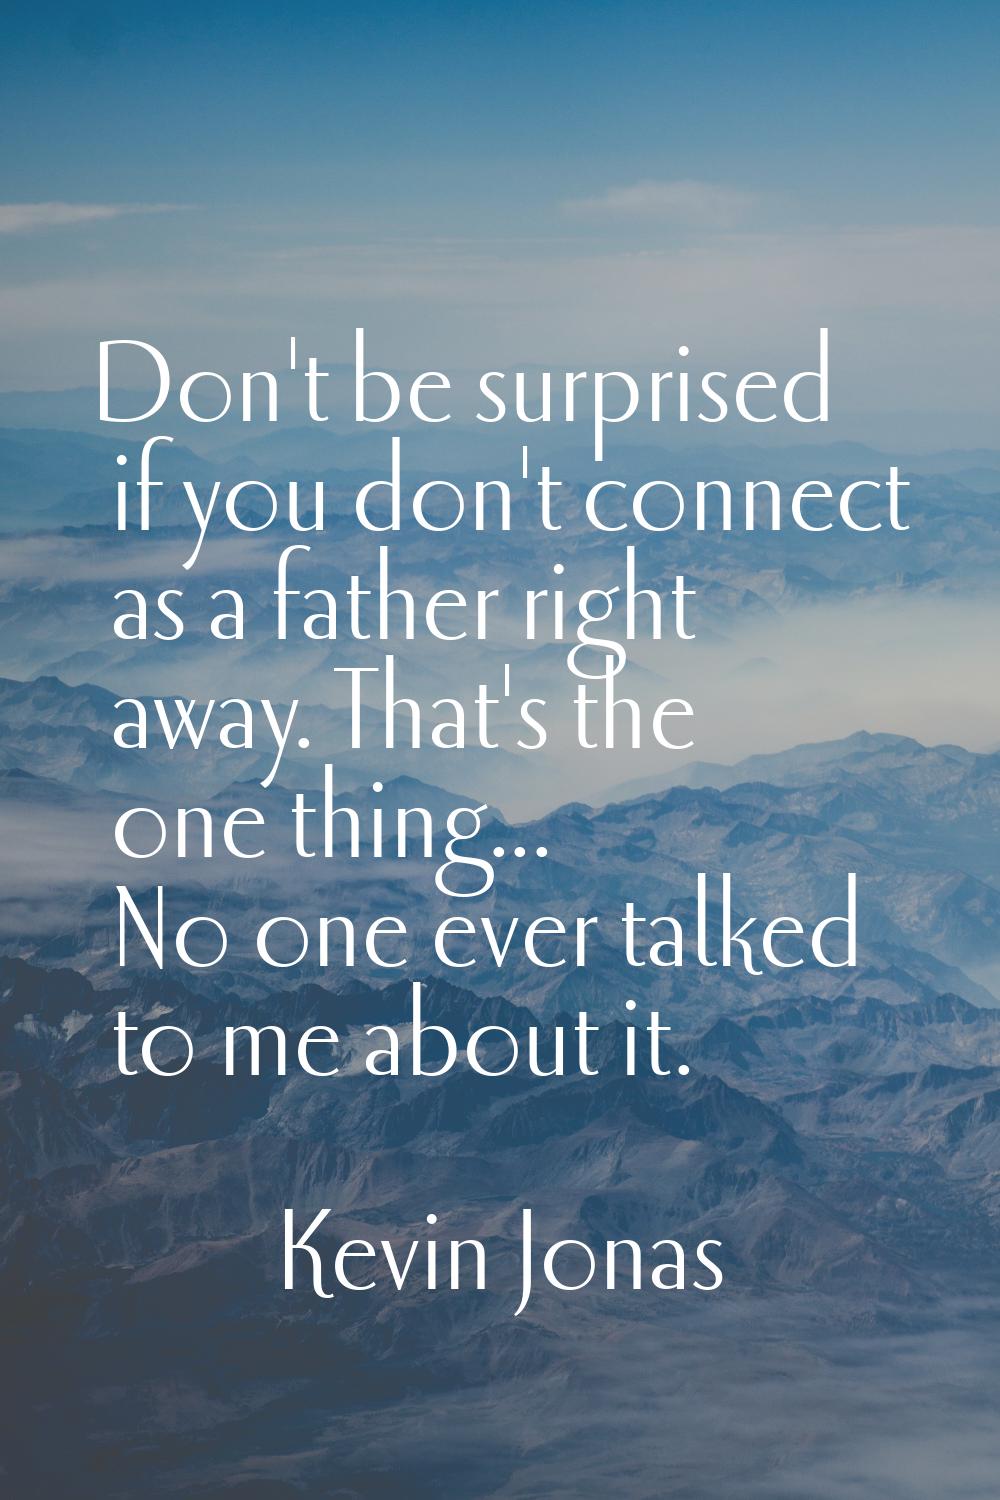 Don't be surprised if you don't connect as a father right away. That's the one thing... No one ever